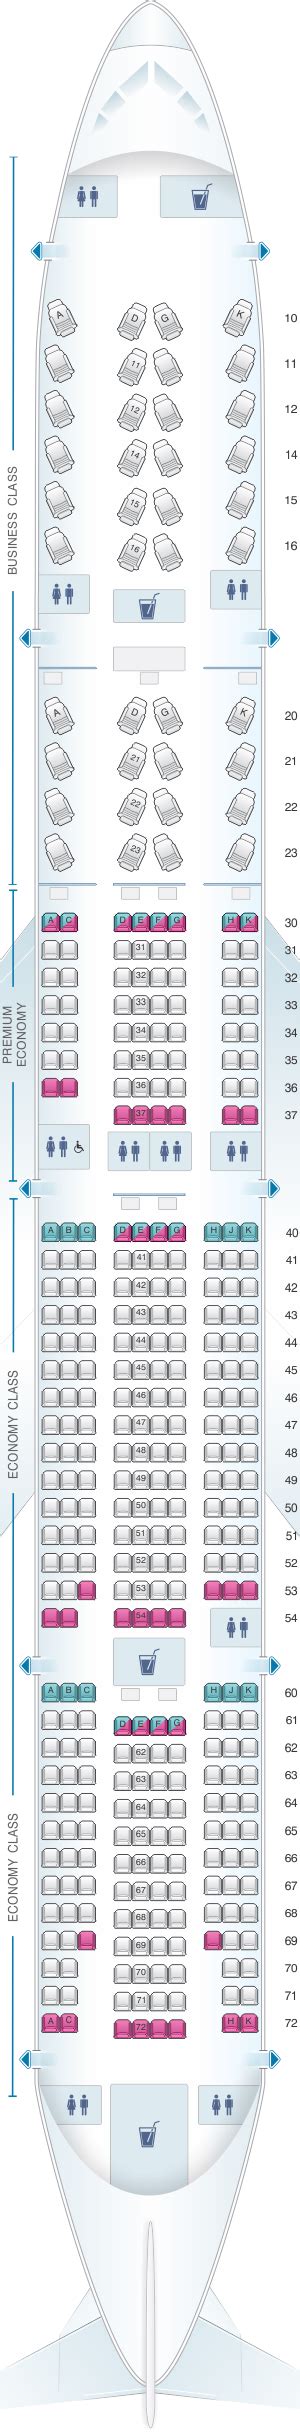 Seat Map China Airlines Boeing B777 300er Seatmaestro